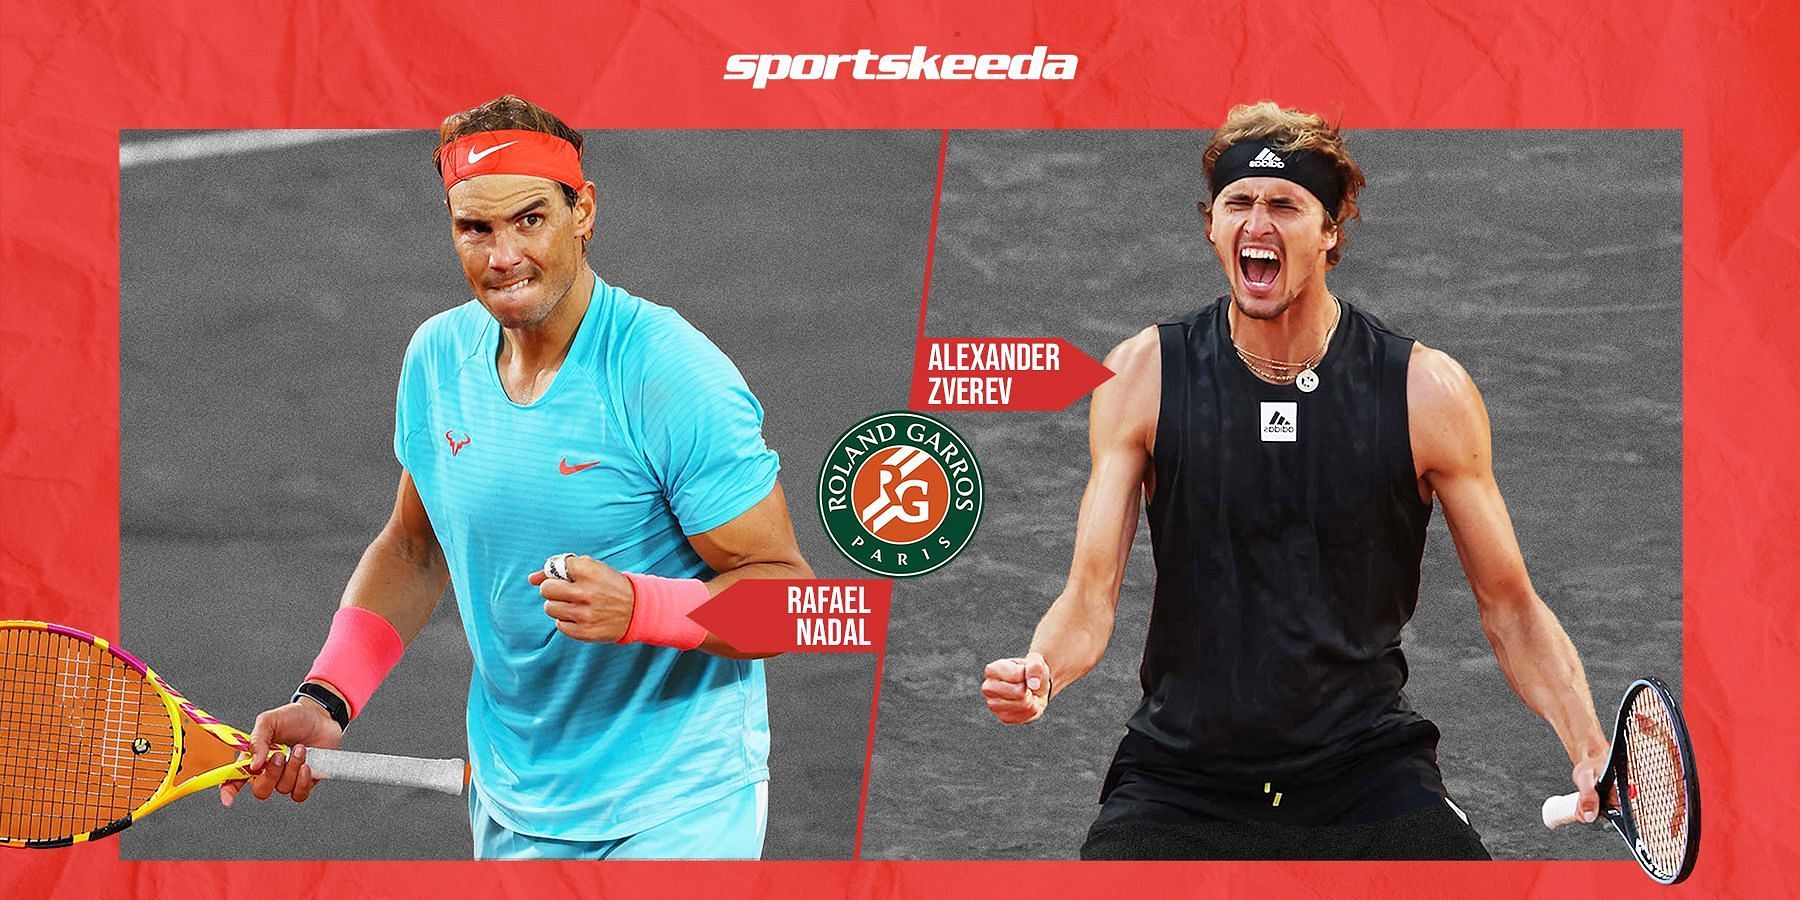 Rafael Nadal faces Alexander Zverev in the semifinals of the French Open